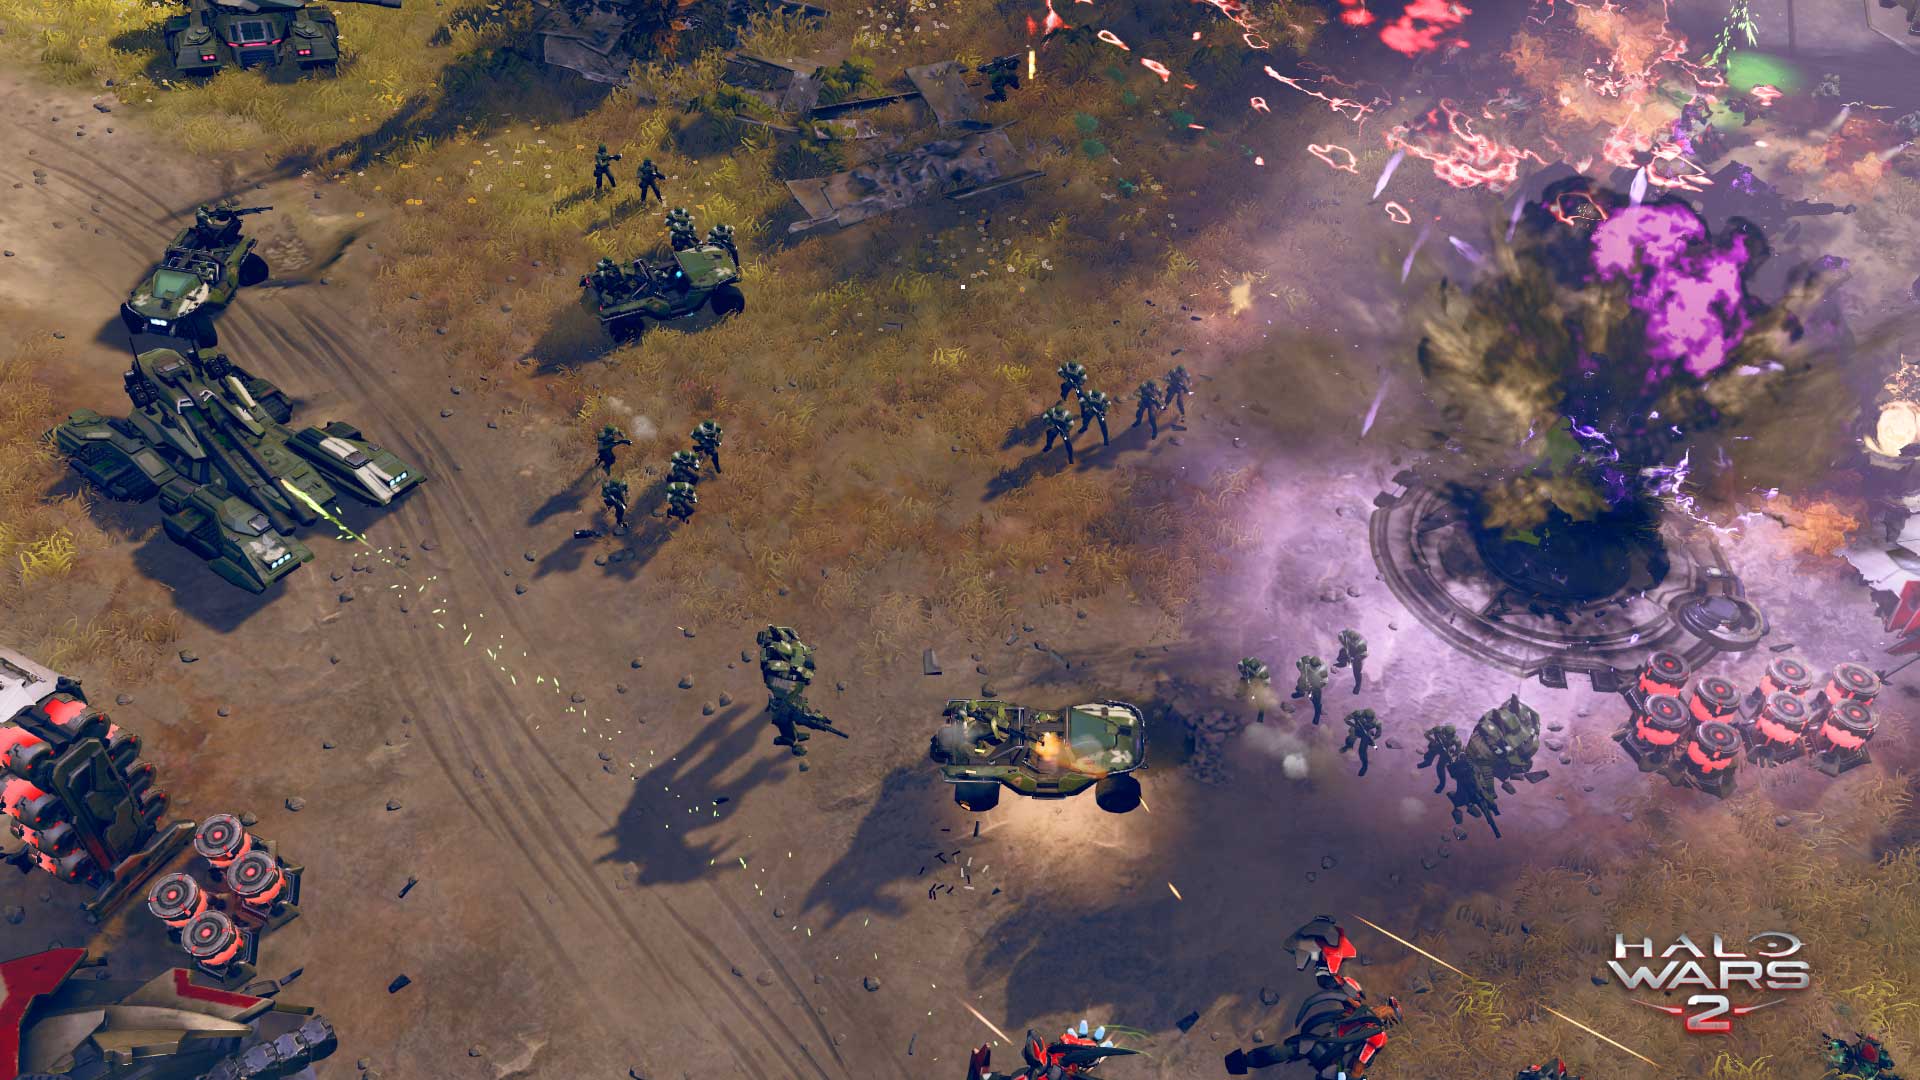 Large scale battle in Halo Wars 2